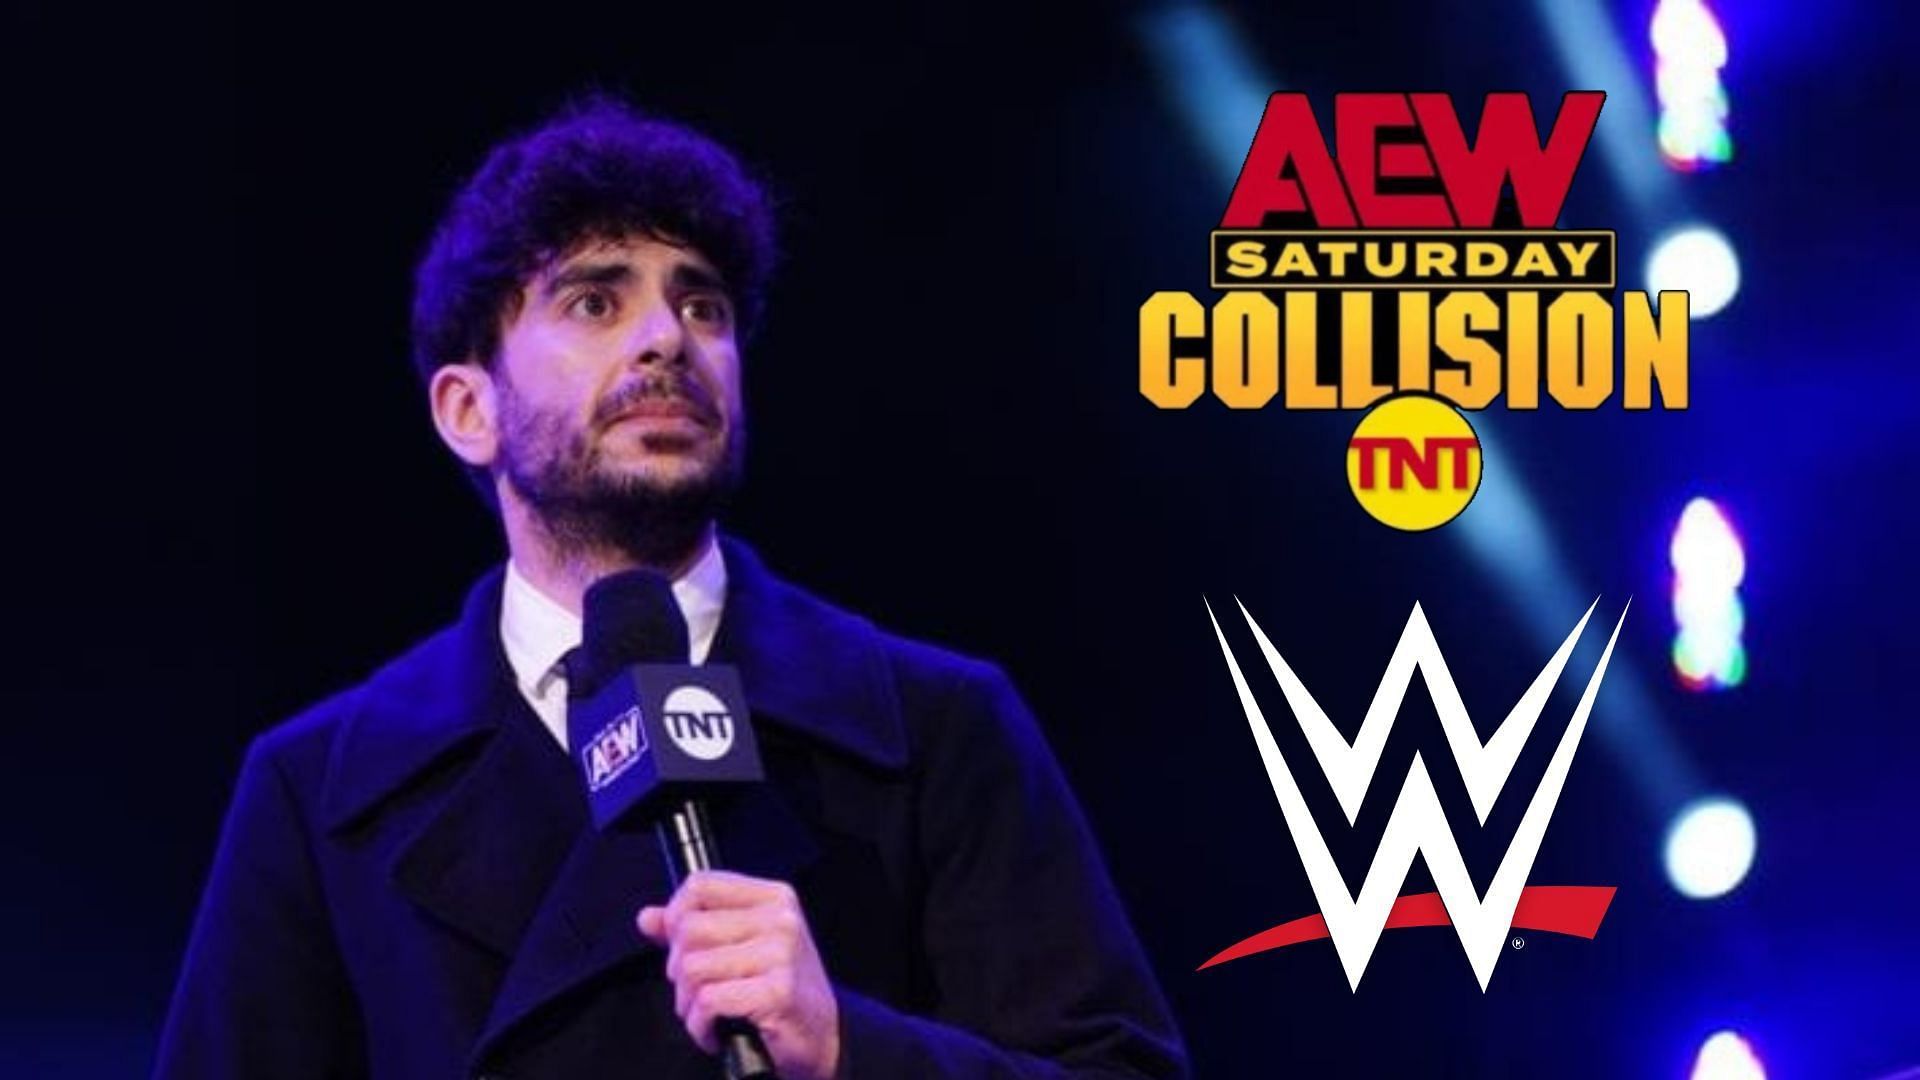 A top AEW star may be on his way out the door.